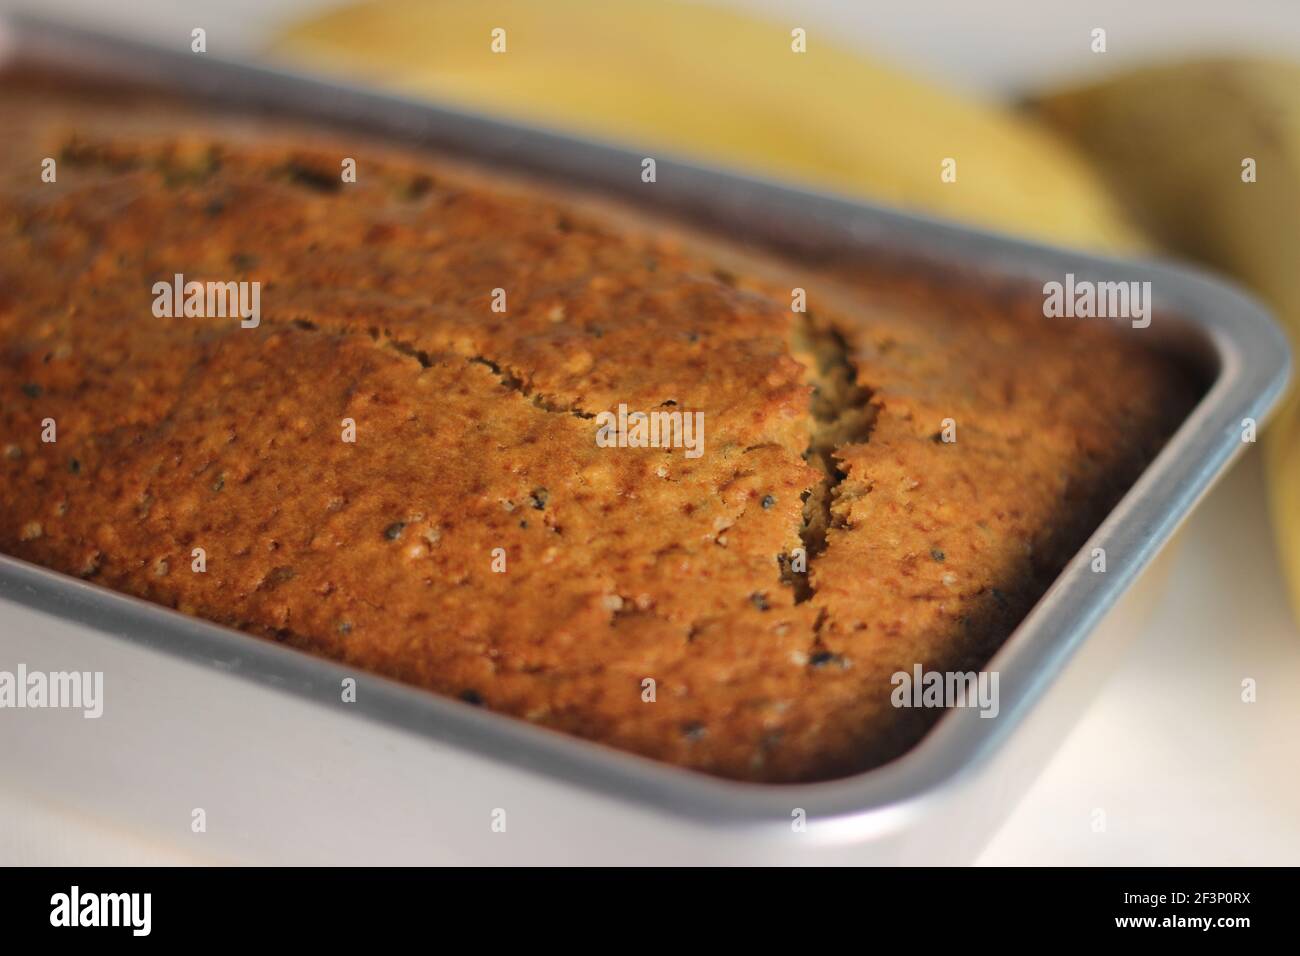 Home baked whole wheat ripe plantain cake. It is also called ripe plantain bread. Full loaf inside the loft tin. Shot on a white background Stock Photo